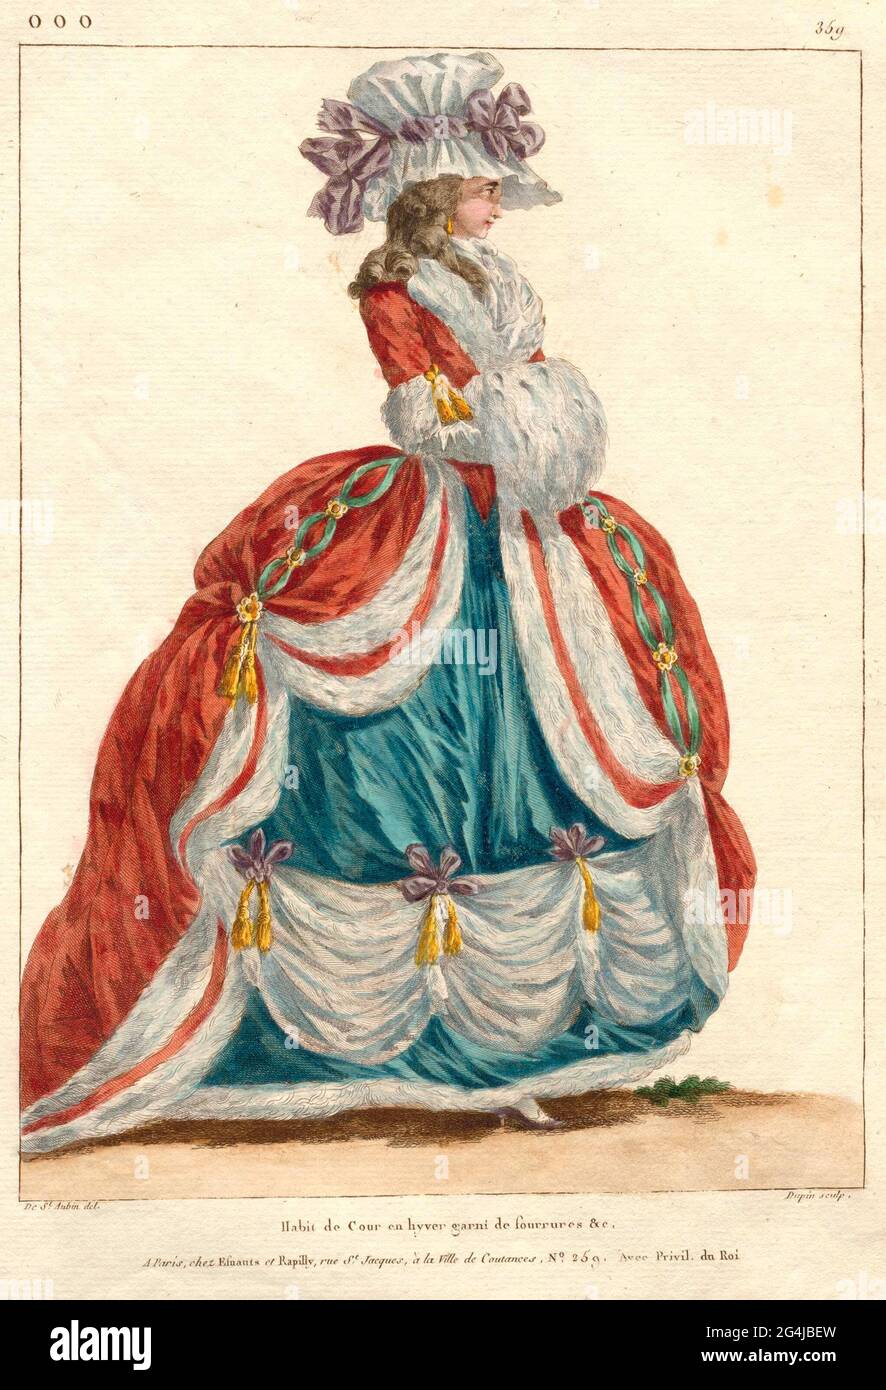 . French queens were expected to set an example in the realm of fashion. As the wife of Louis XVI, Marie Antoinette threw herself into this task with enthusiasm. Together with her marchande de modes Rose Bertin and her hairdresser Léonard, she launched many a new fashion. Court etiquette dictated robes de cour – lavishly embellished gowns with wide skirts. When receiving visitors, Marie Antoinette wore a robe à la polonaise 1 2, but preferred an informal, loose-fitting gown when at her own pavilion in Versailles. This chemise de la reine 3 was quickly adopted by other women of the elite. Stock Photo